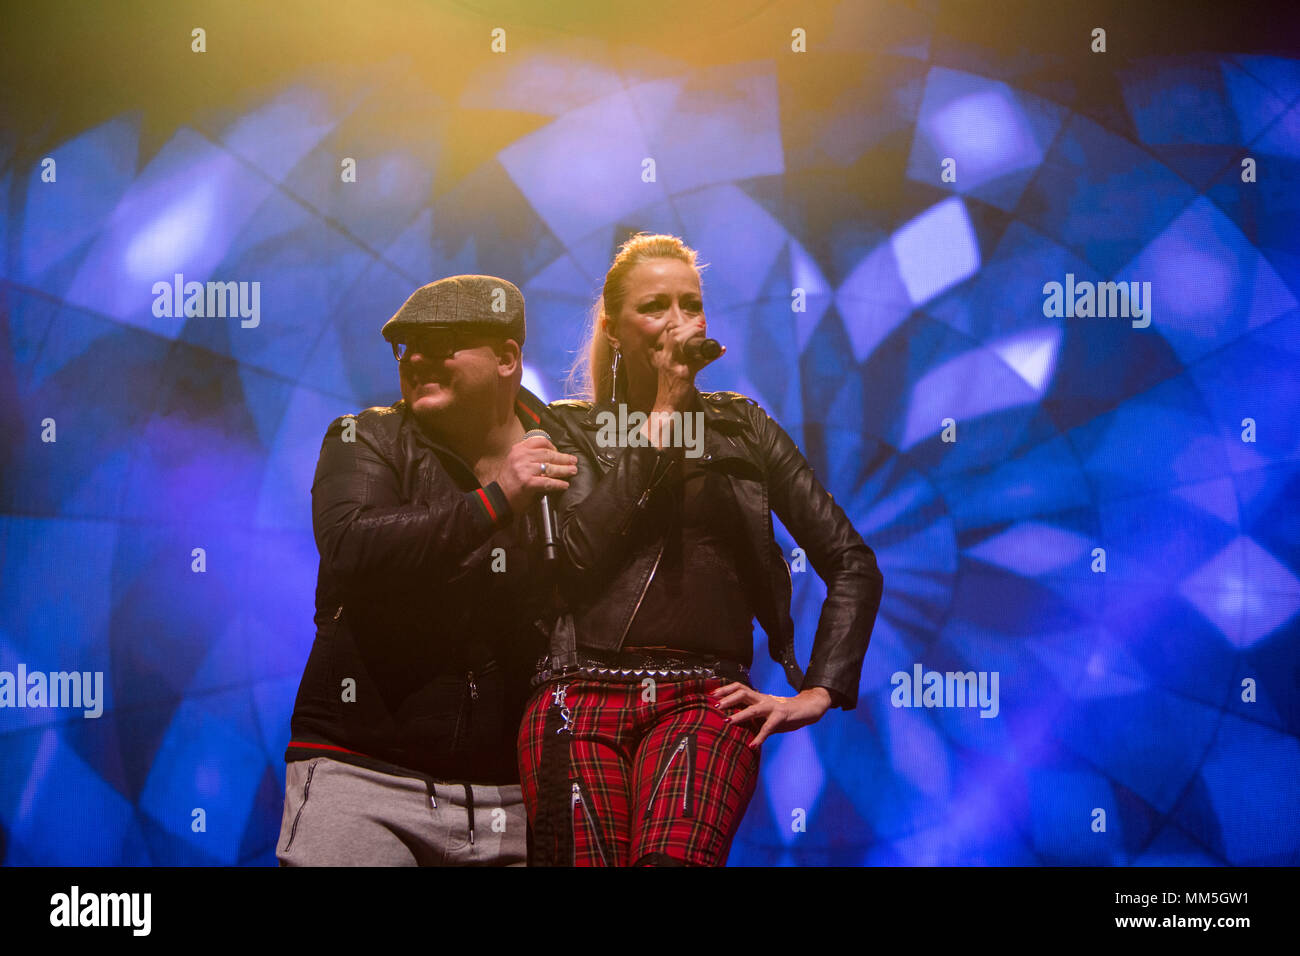 Norway, Bergen - April 30, 2018. The Danish Eurodance group Daze performs a live concert during the We Love the 90’s show at Bergenshallen in Bergen. Here singer Trine Bix (R) is seen live on stage with Jesper Tønnov Rasmussen (L). (Photo credit: Gonzales Photo - Jarle H. Moe). Stock Photo